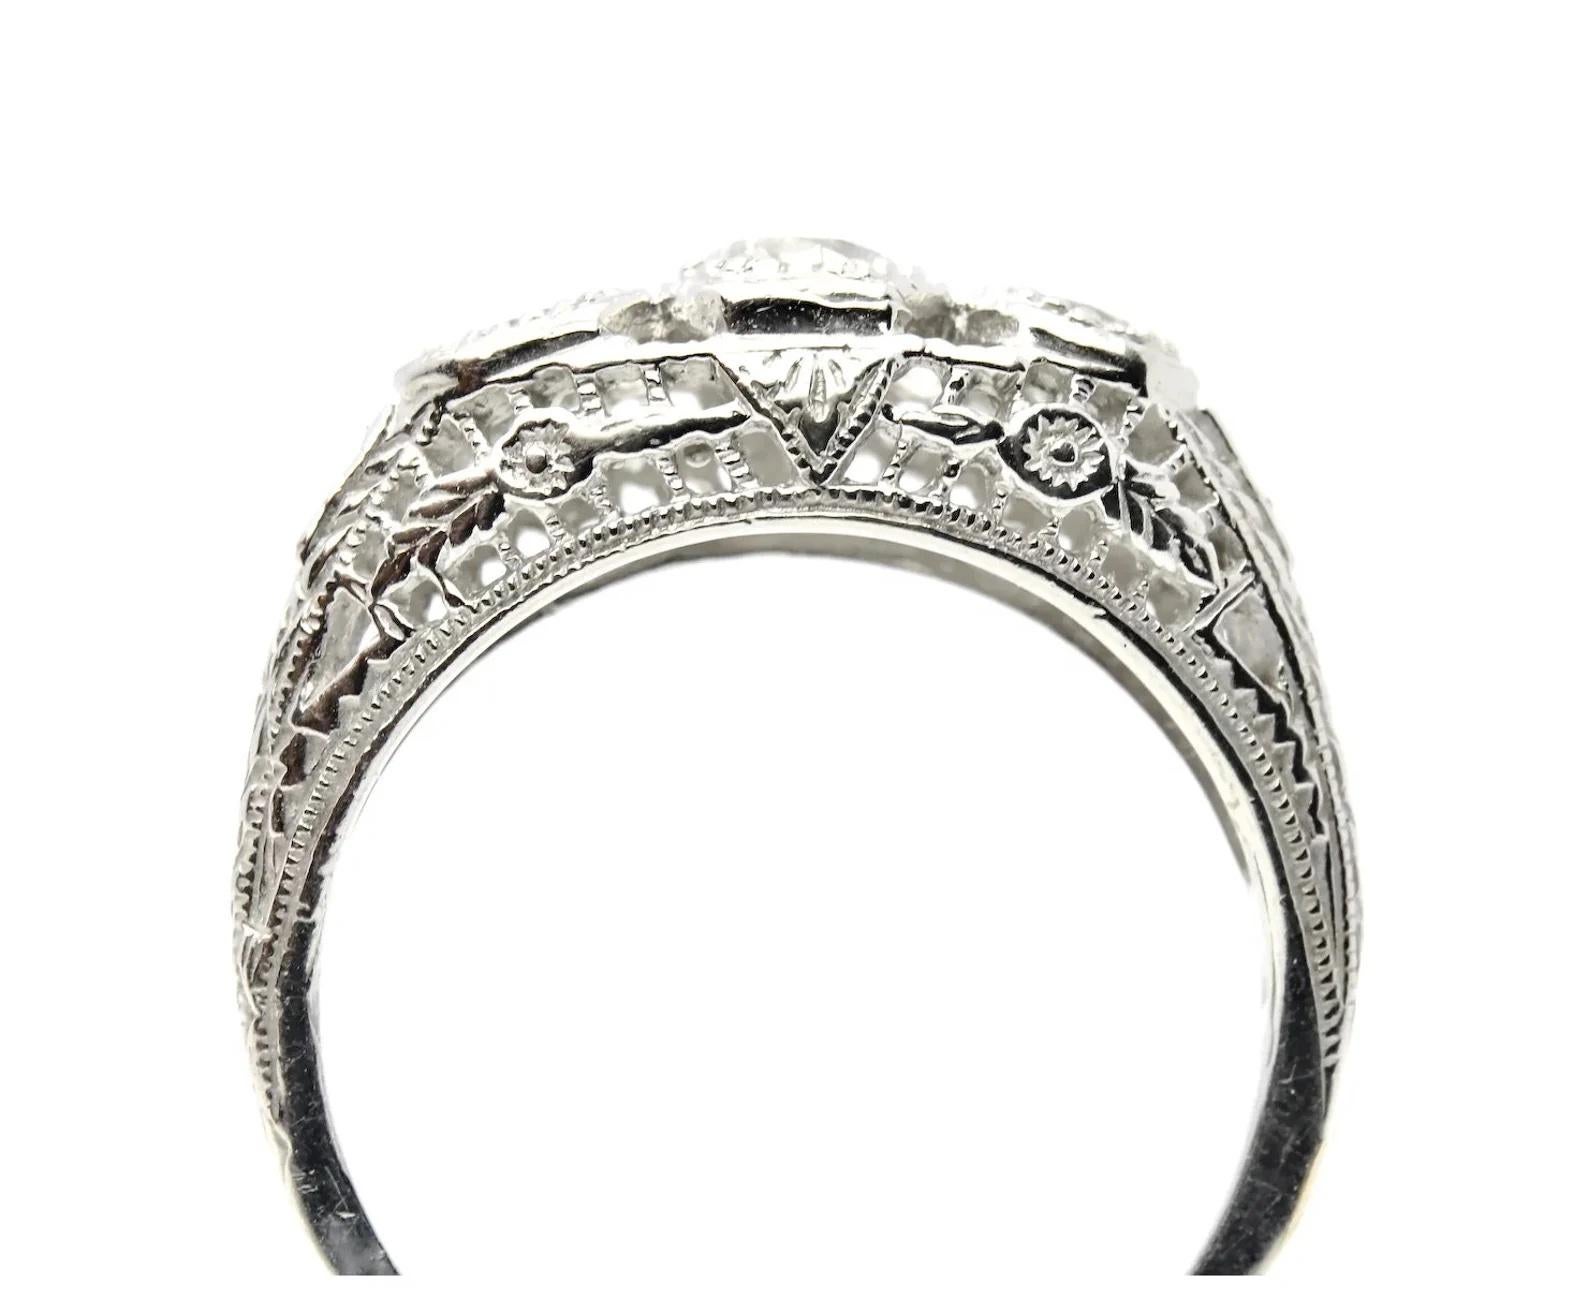 Floral Art Deco 0.80ctw Three Stone Diamond Ring in 18K White Gold In Good Condition For Sale In Boston, MA